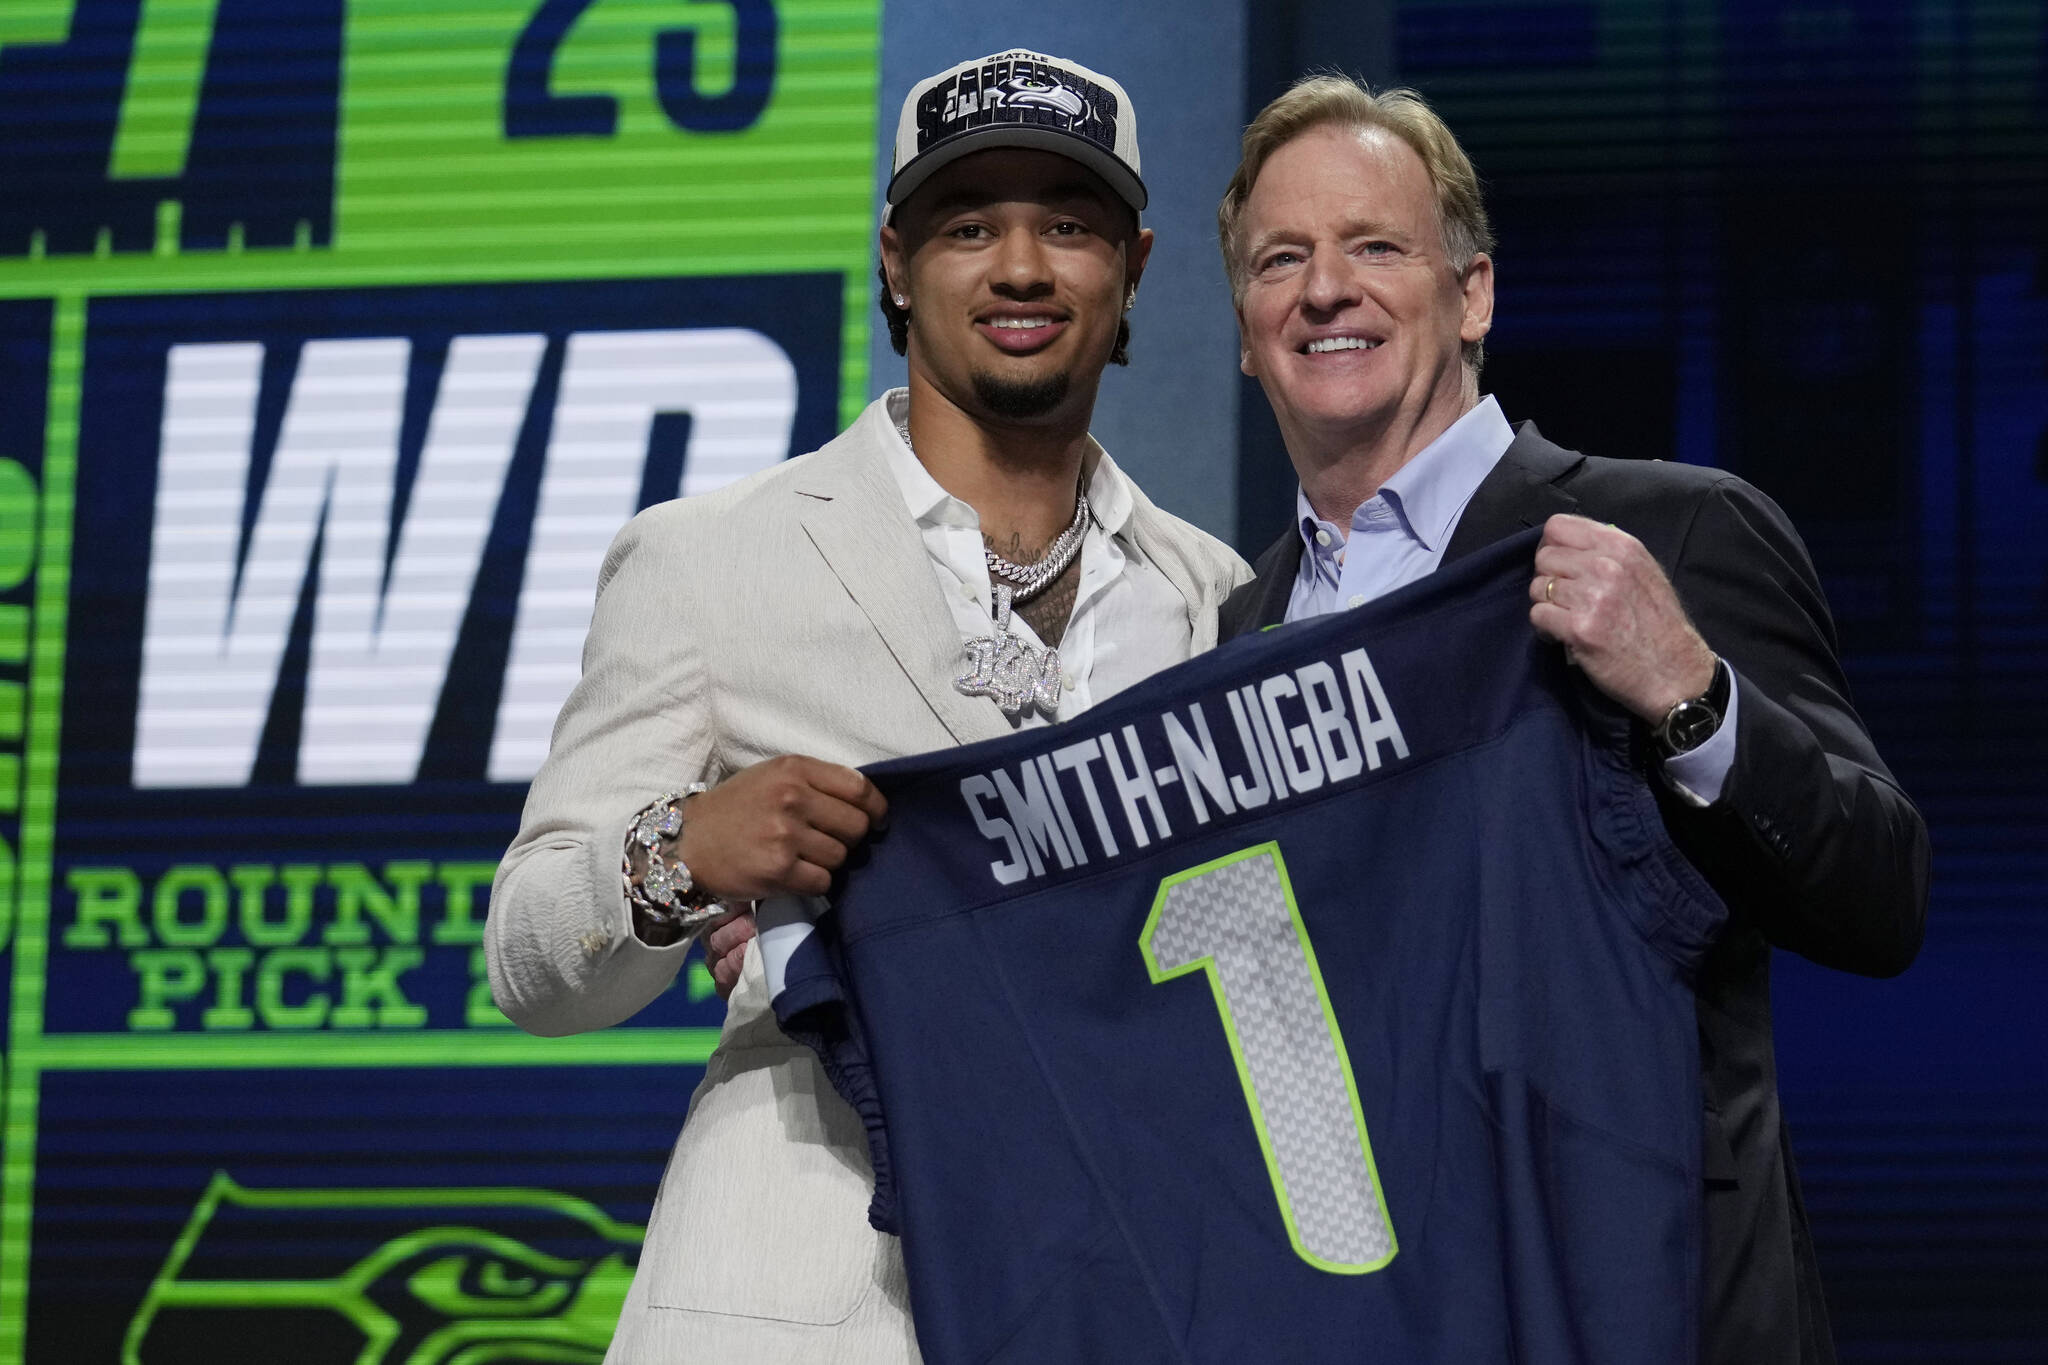 Ohio State wide receiver Jaxon Smith-Njigba, left, poses with NFL Commissioner Roger Goodell after being chosen by the Seattle Seahawks with the 20th overall pick during the first round of the NFL football draft, Thursday, April 27, 2023, in Kansas City, Mo. (AP Photo/Jeff Roberson)